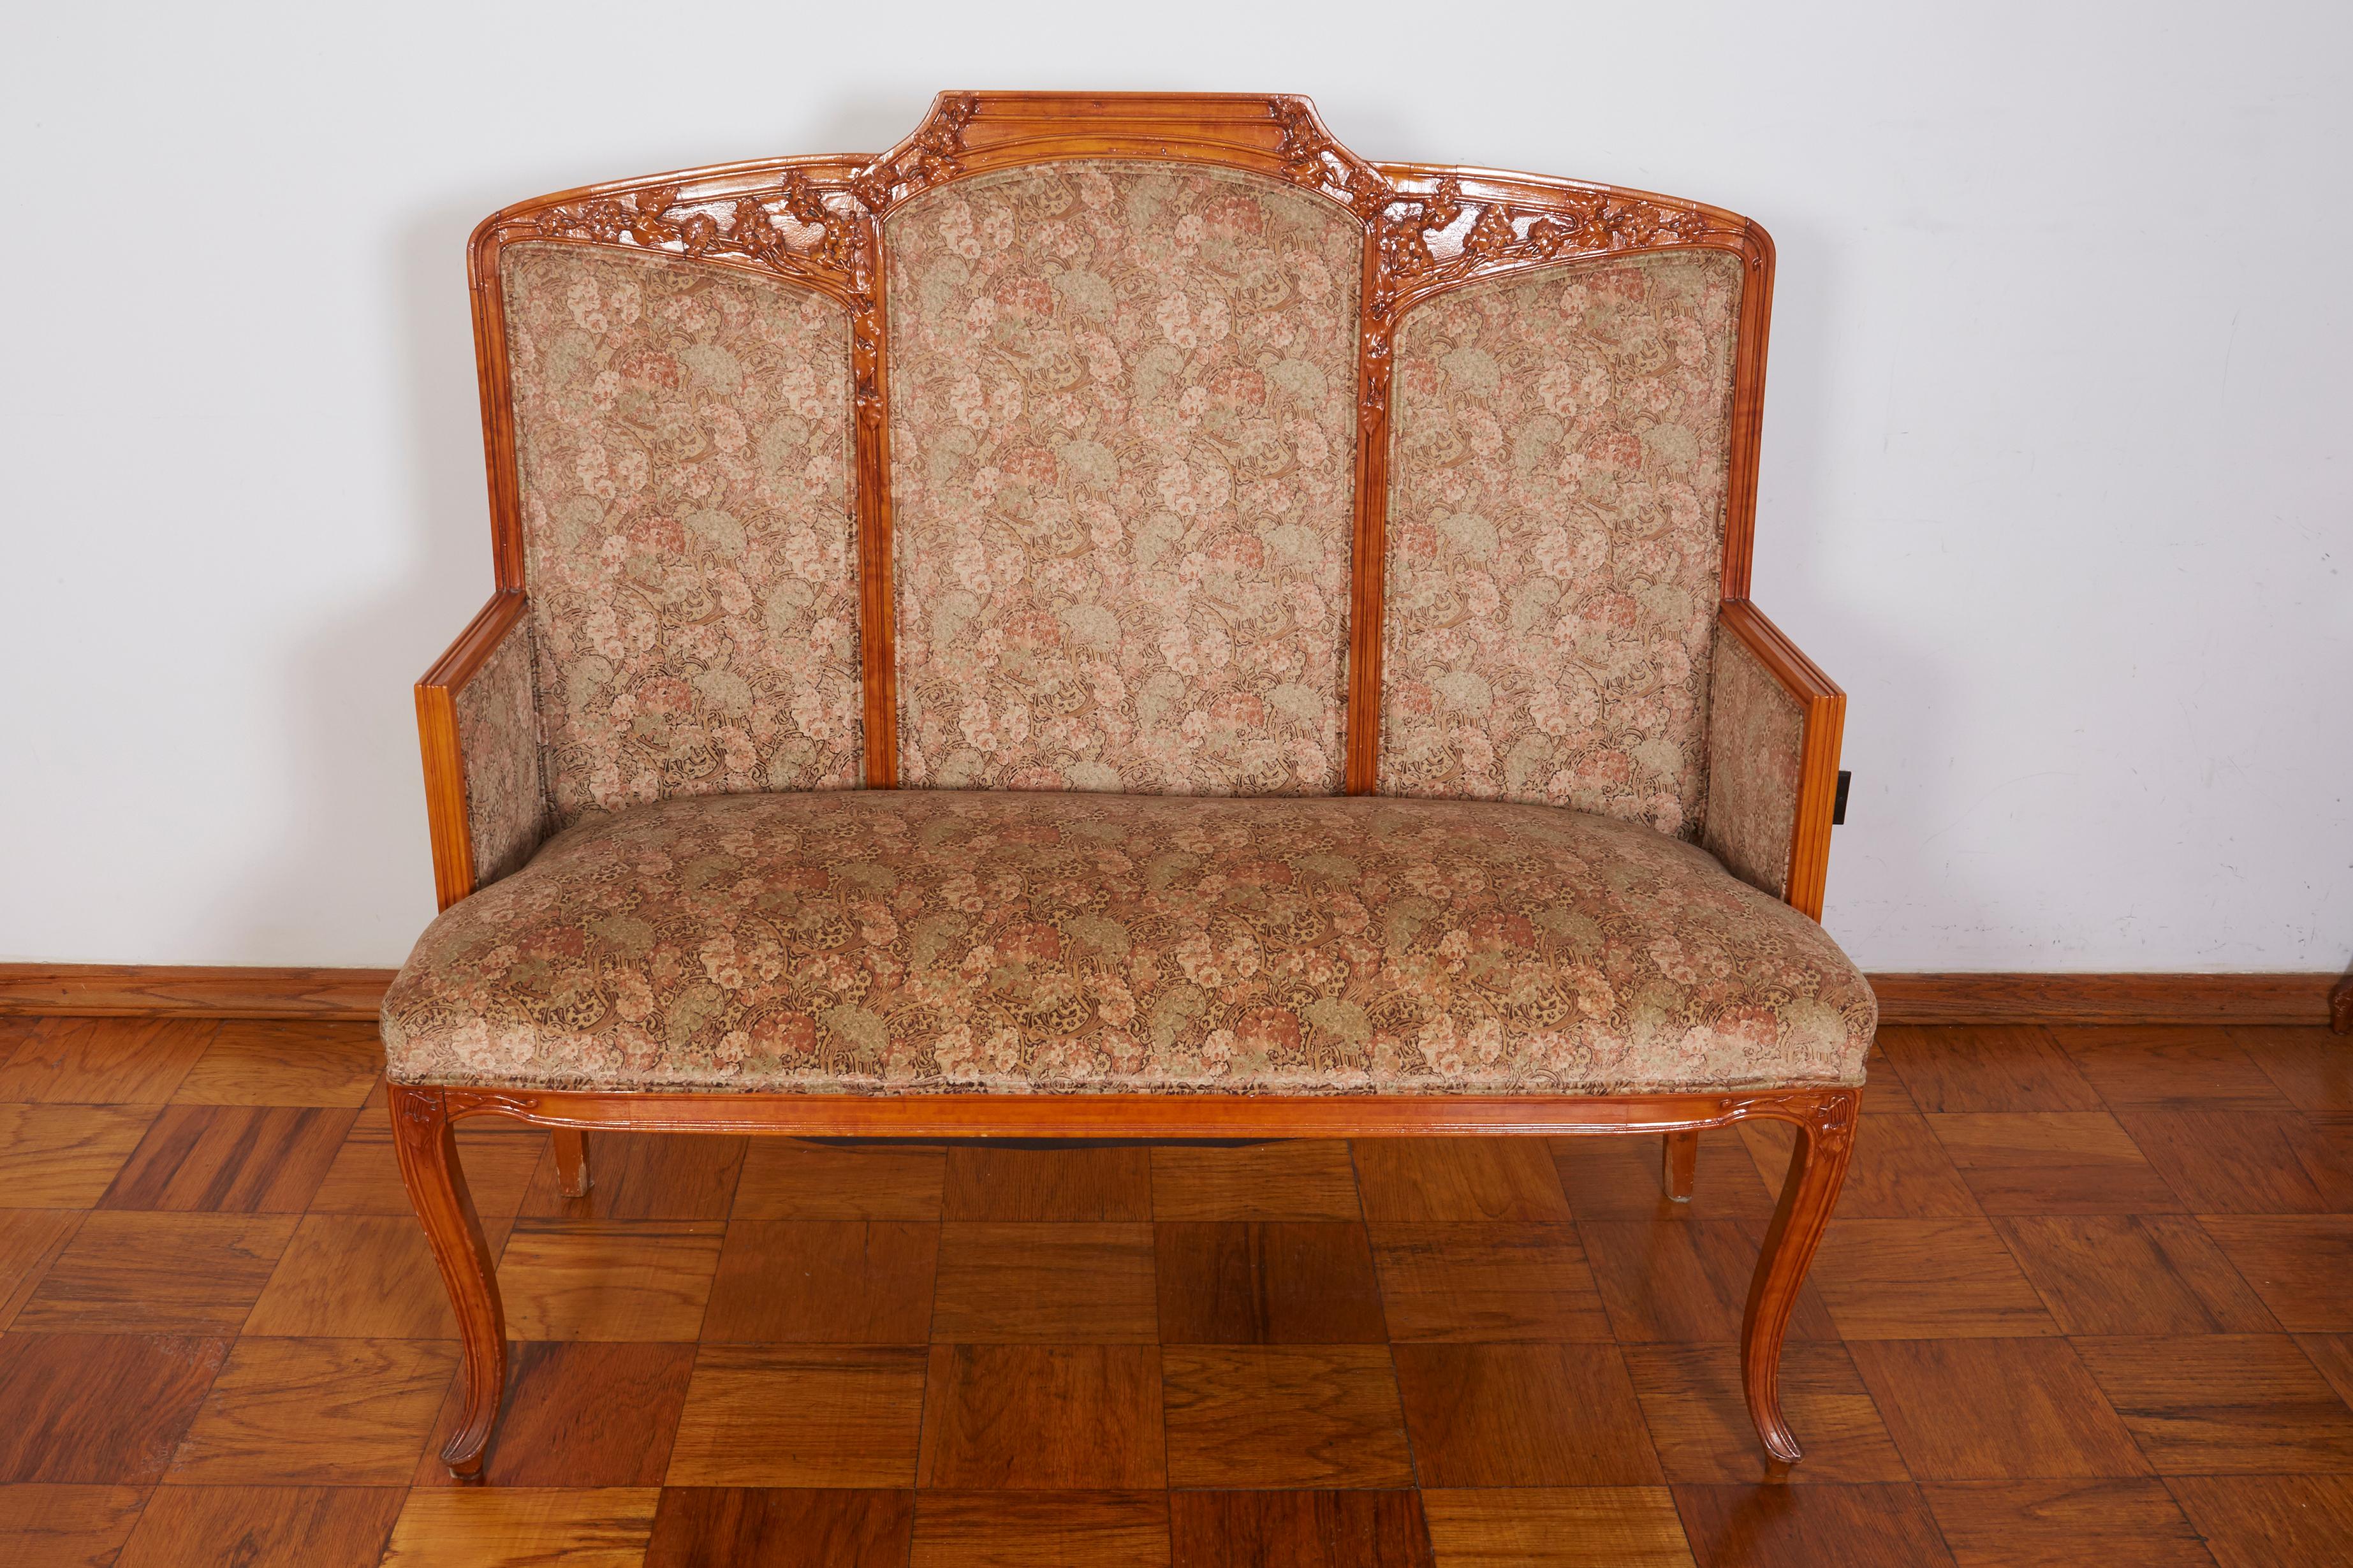 French Art Nouveau sofa, 2 armchairs and 2 chairs by Louis Majorelle.
Measures: Sofa: height 46